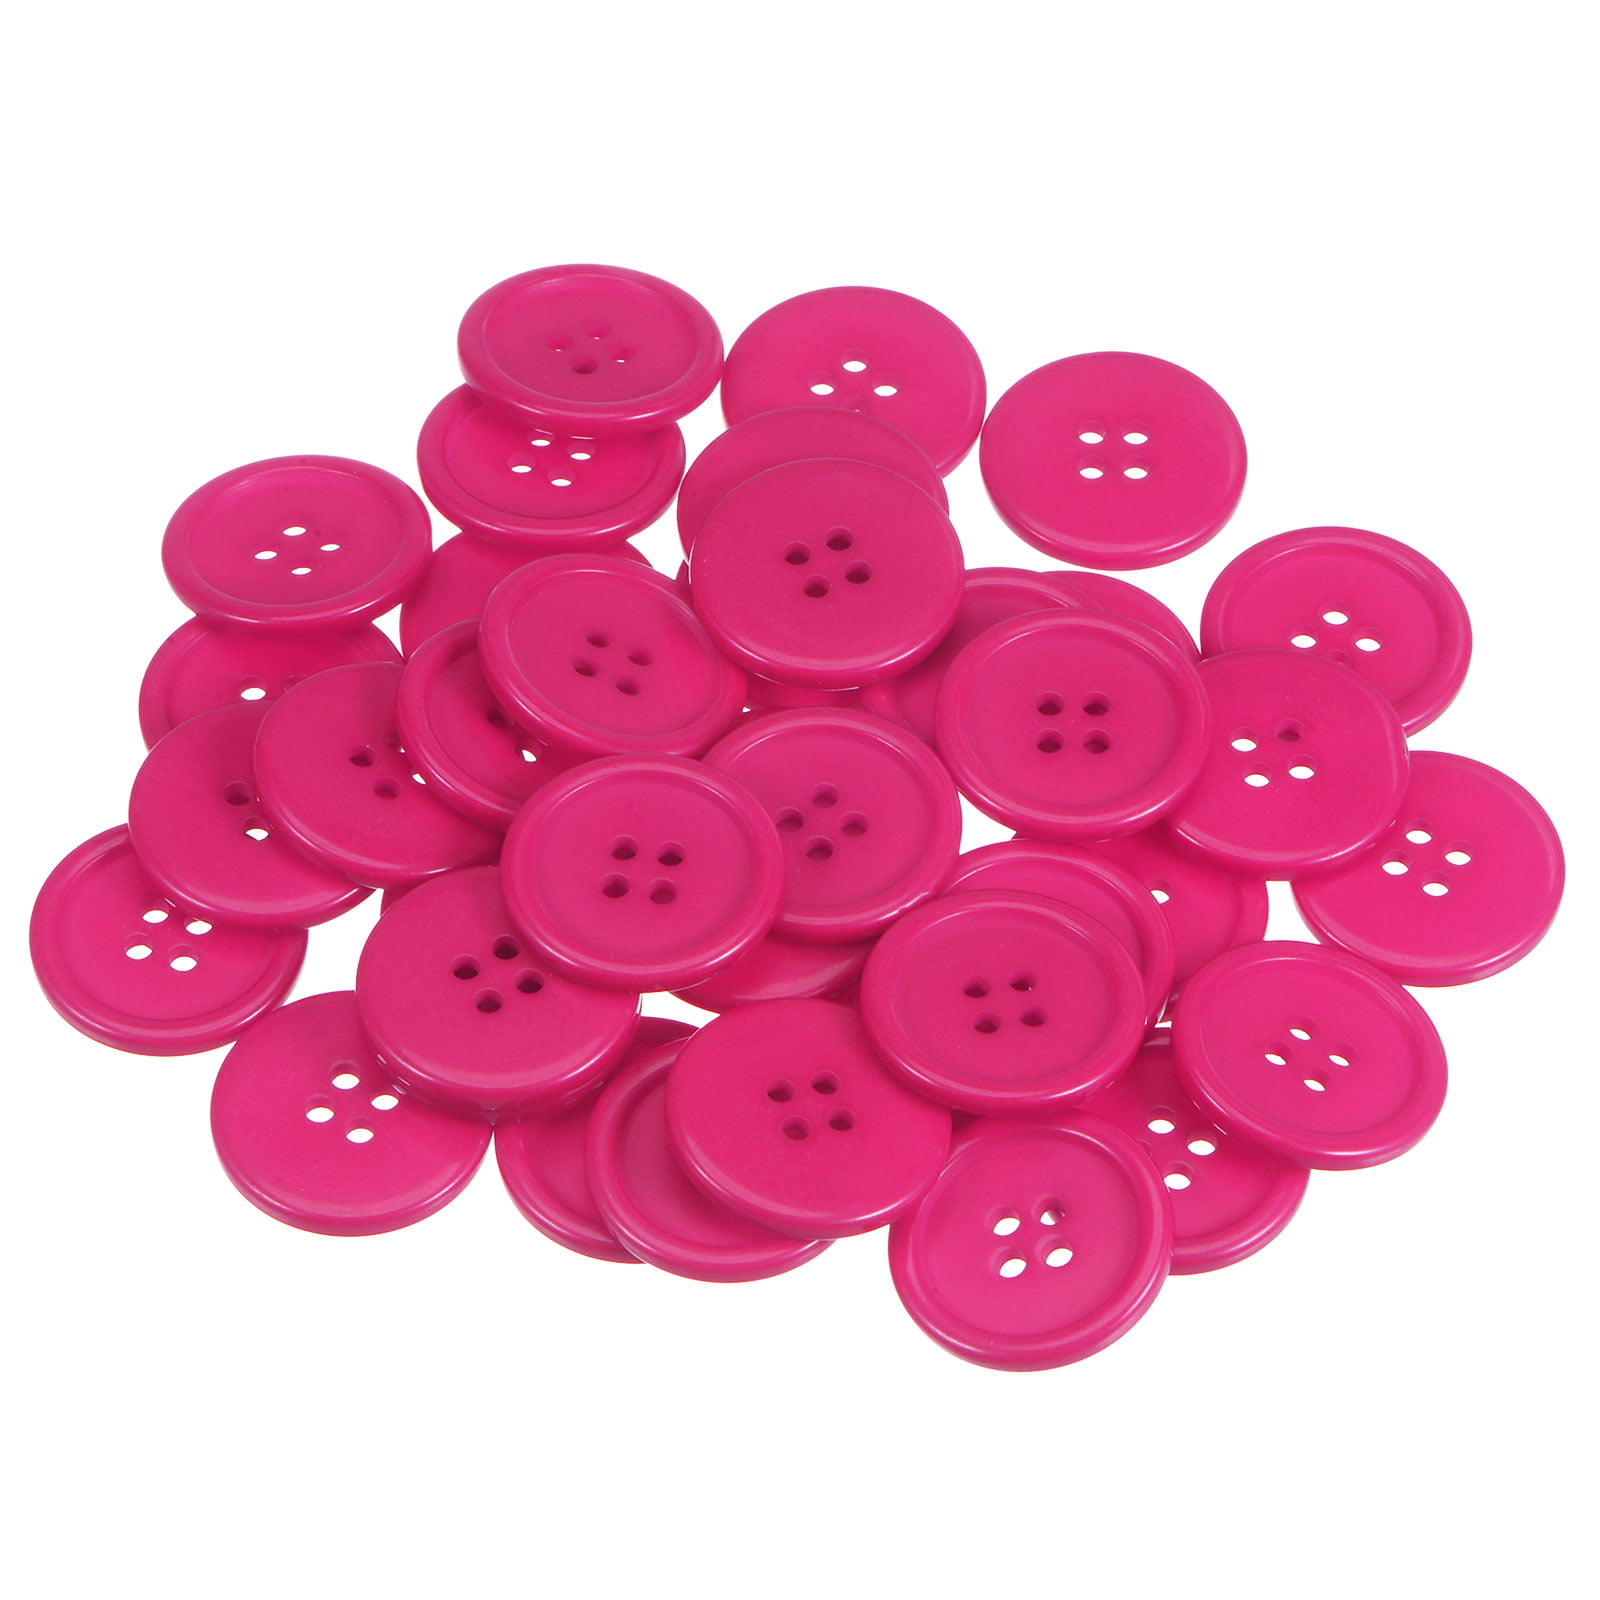 1 Inch Buttons 4 Holes Round Buttons 25mm for DIY Sewing Craft, Multicolor  100 Pcs